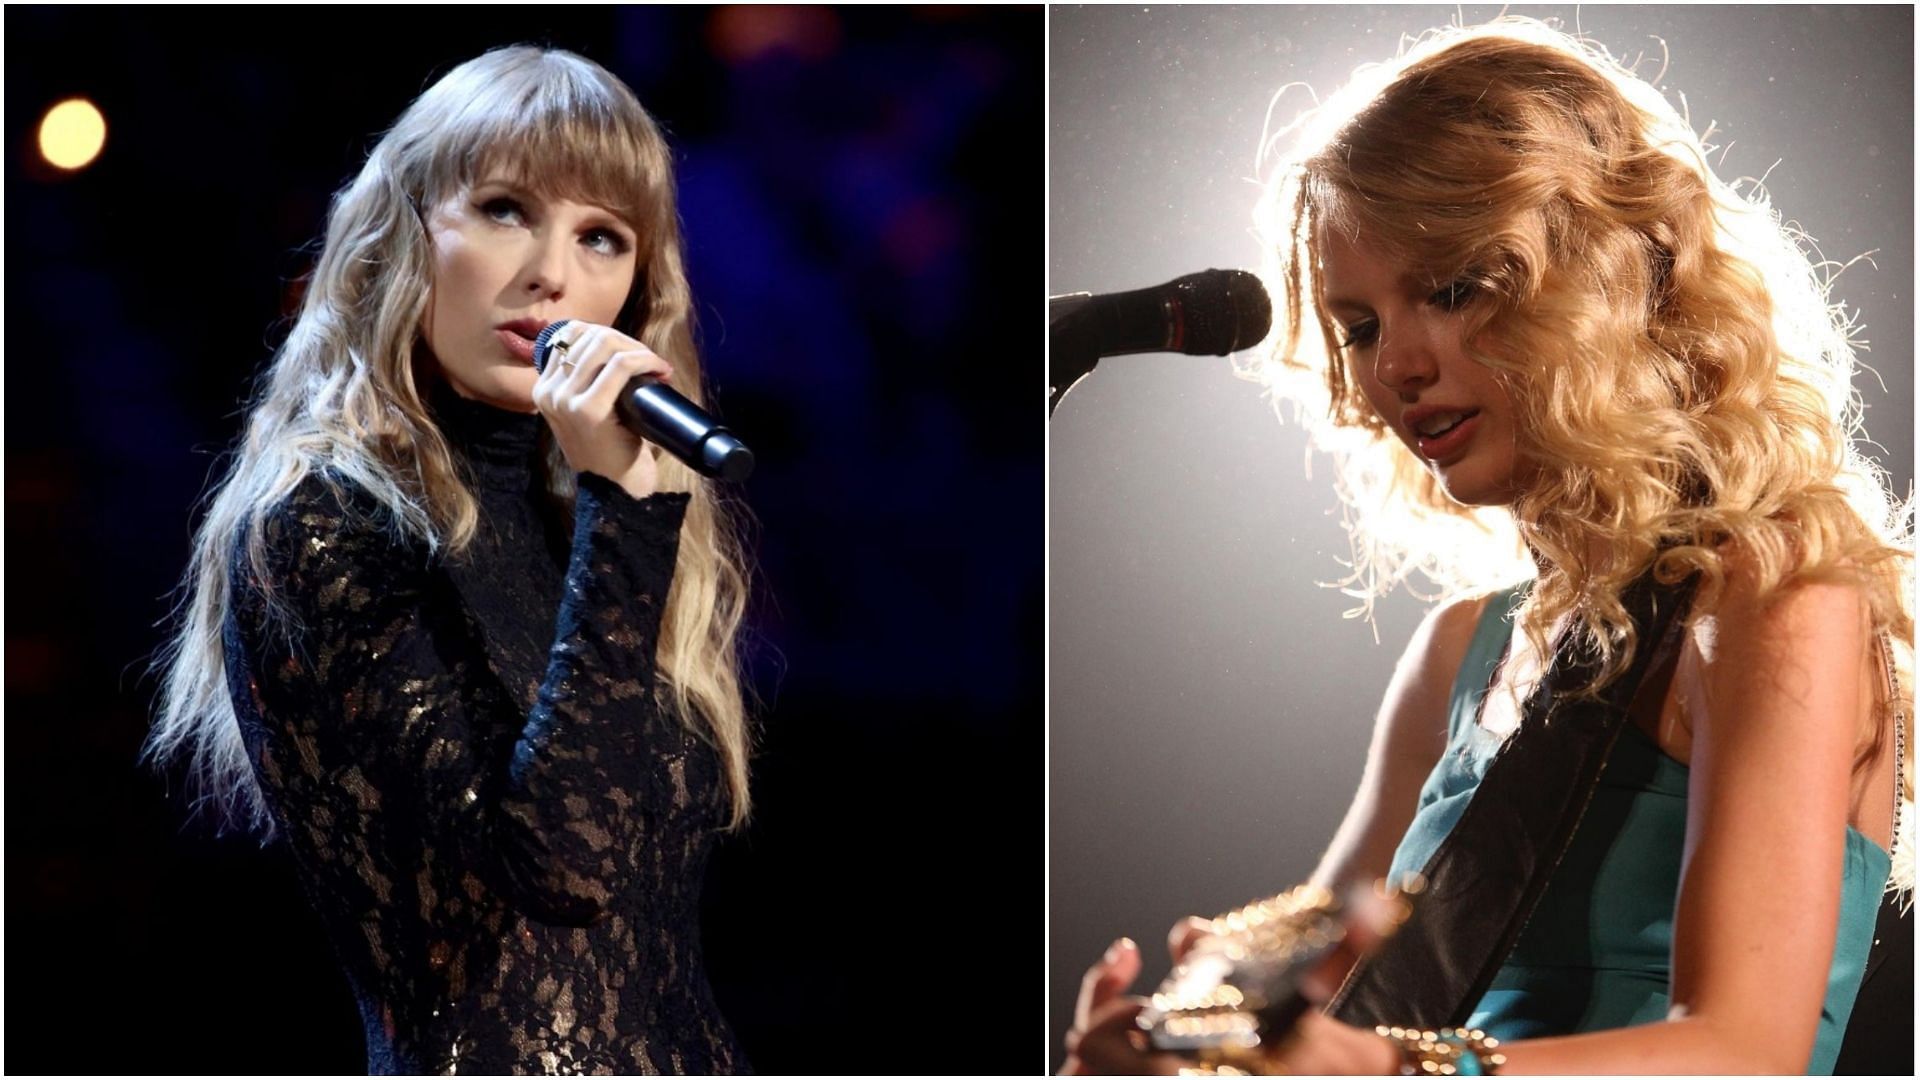 Taylor Swift has denied copyright allegations over Shake It Off (Image via Getty and Instagram / @taylorswift)